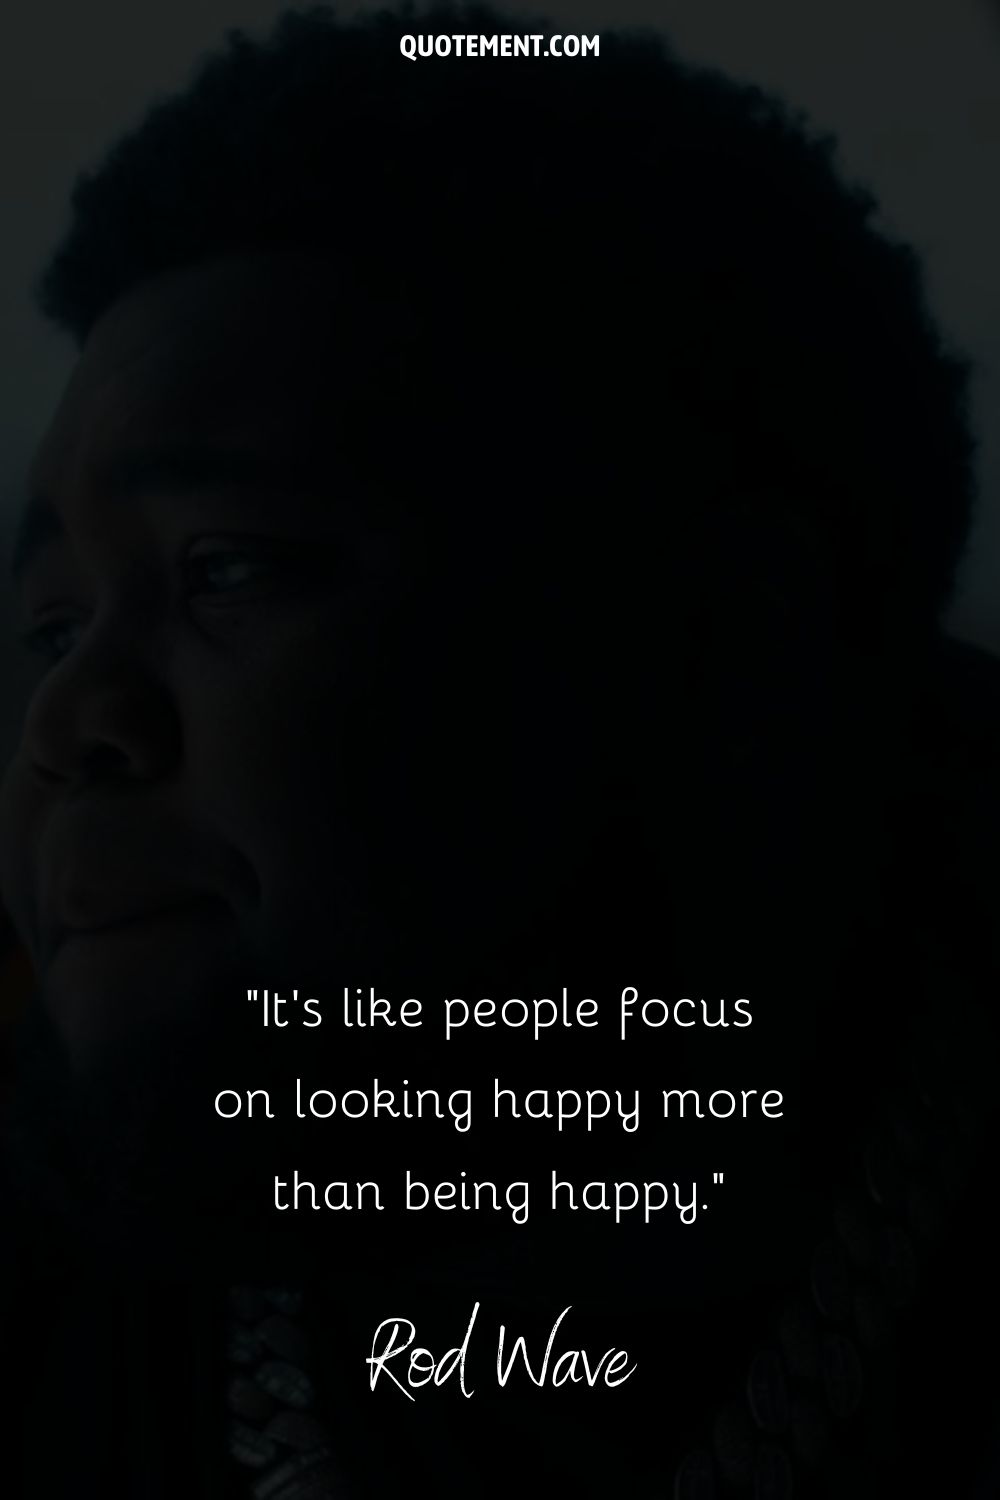 “It’s like people focus on looking happy more than being happy.” — Rod Wave